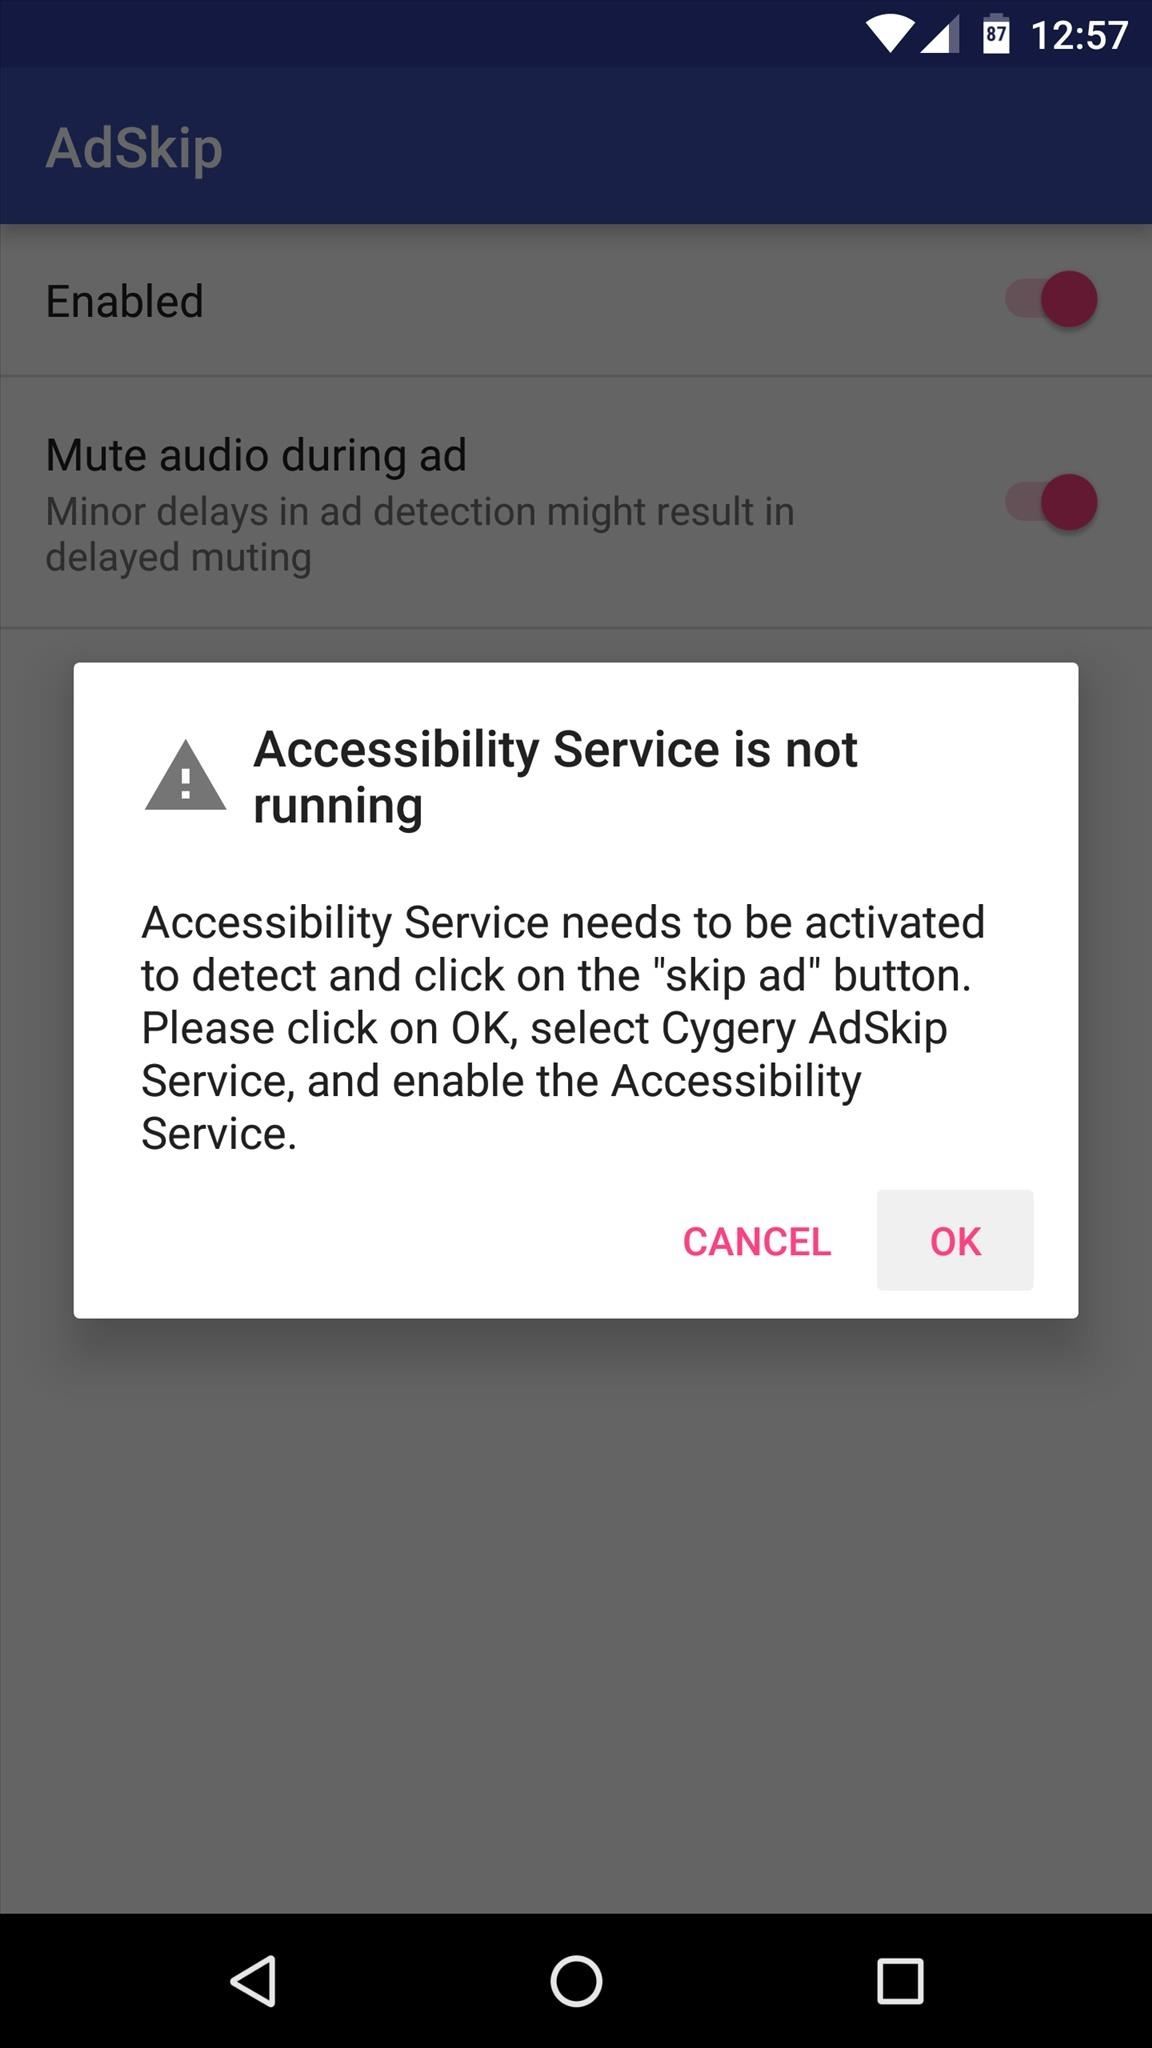 How to Automatically Skip YouTube Ads on Android—Without Rooting